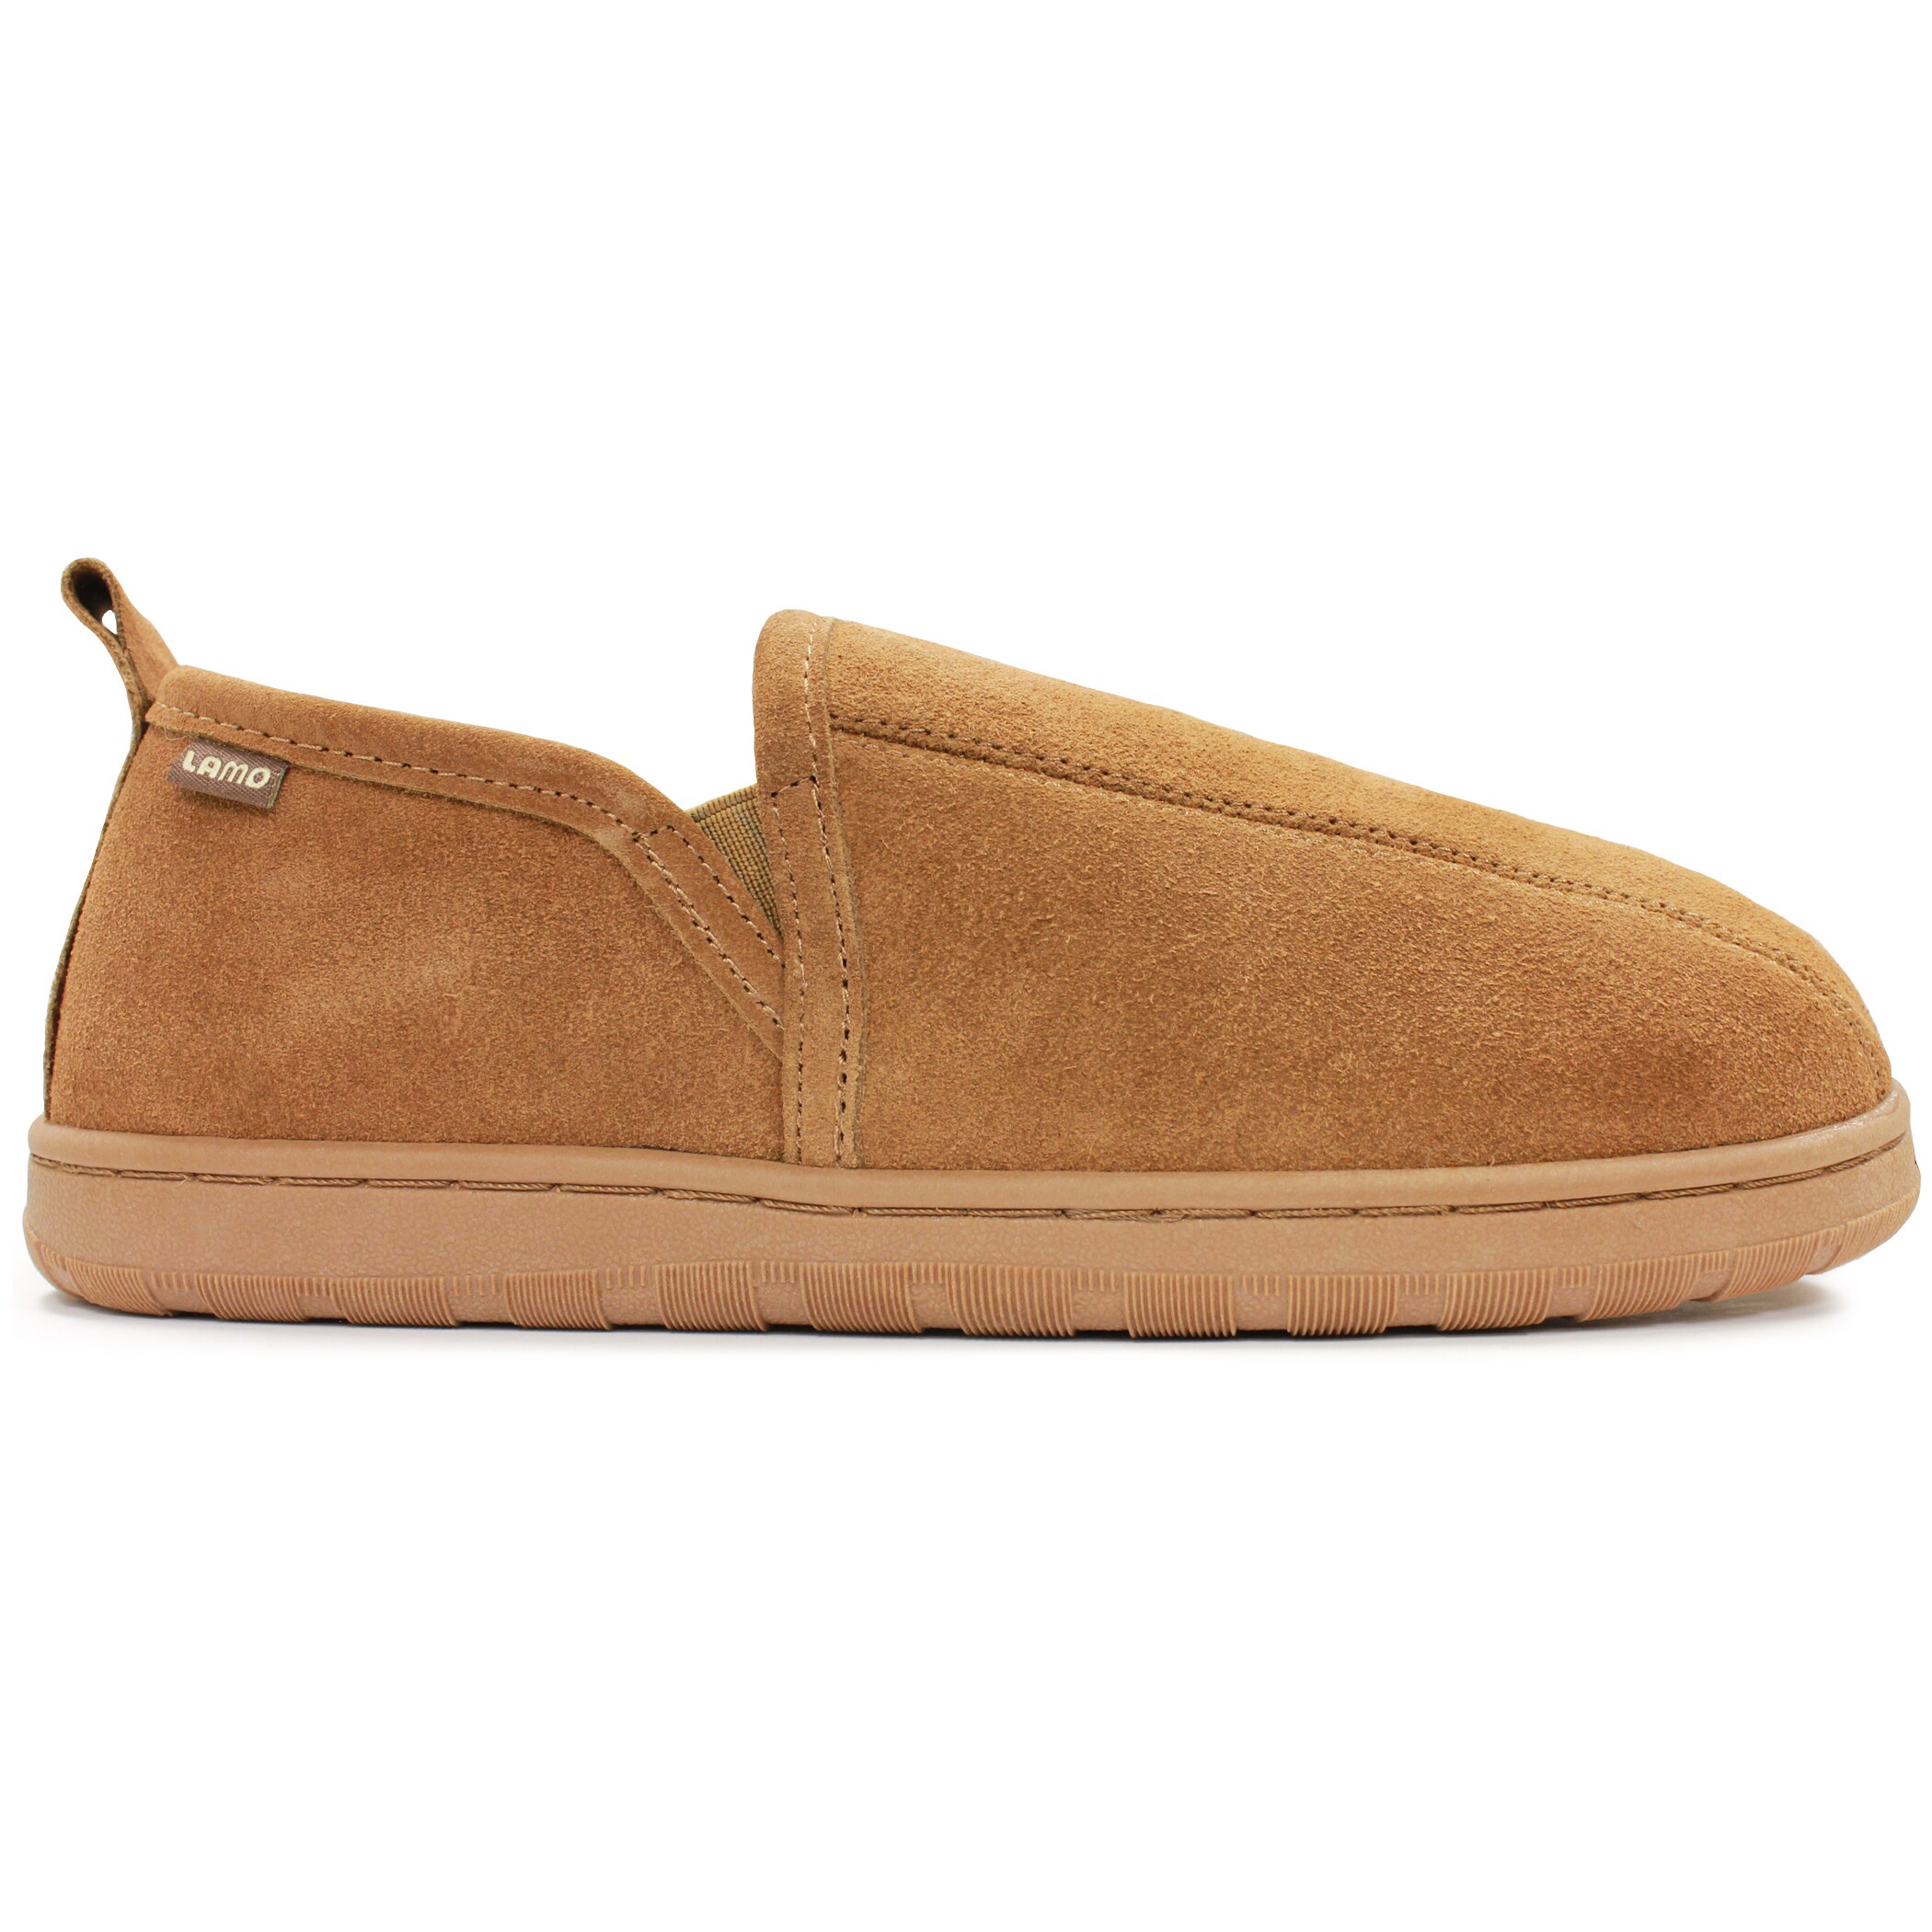 romeo slippers leather sole